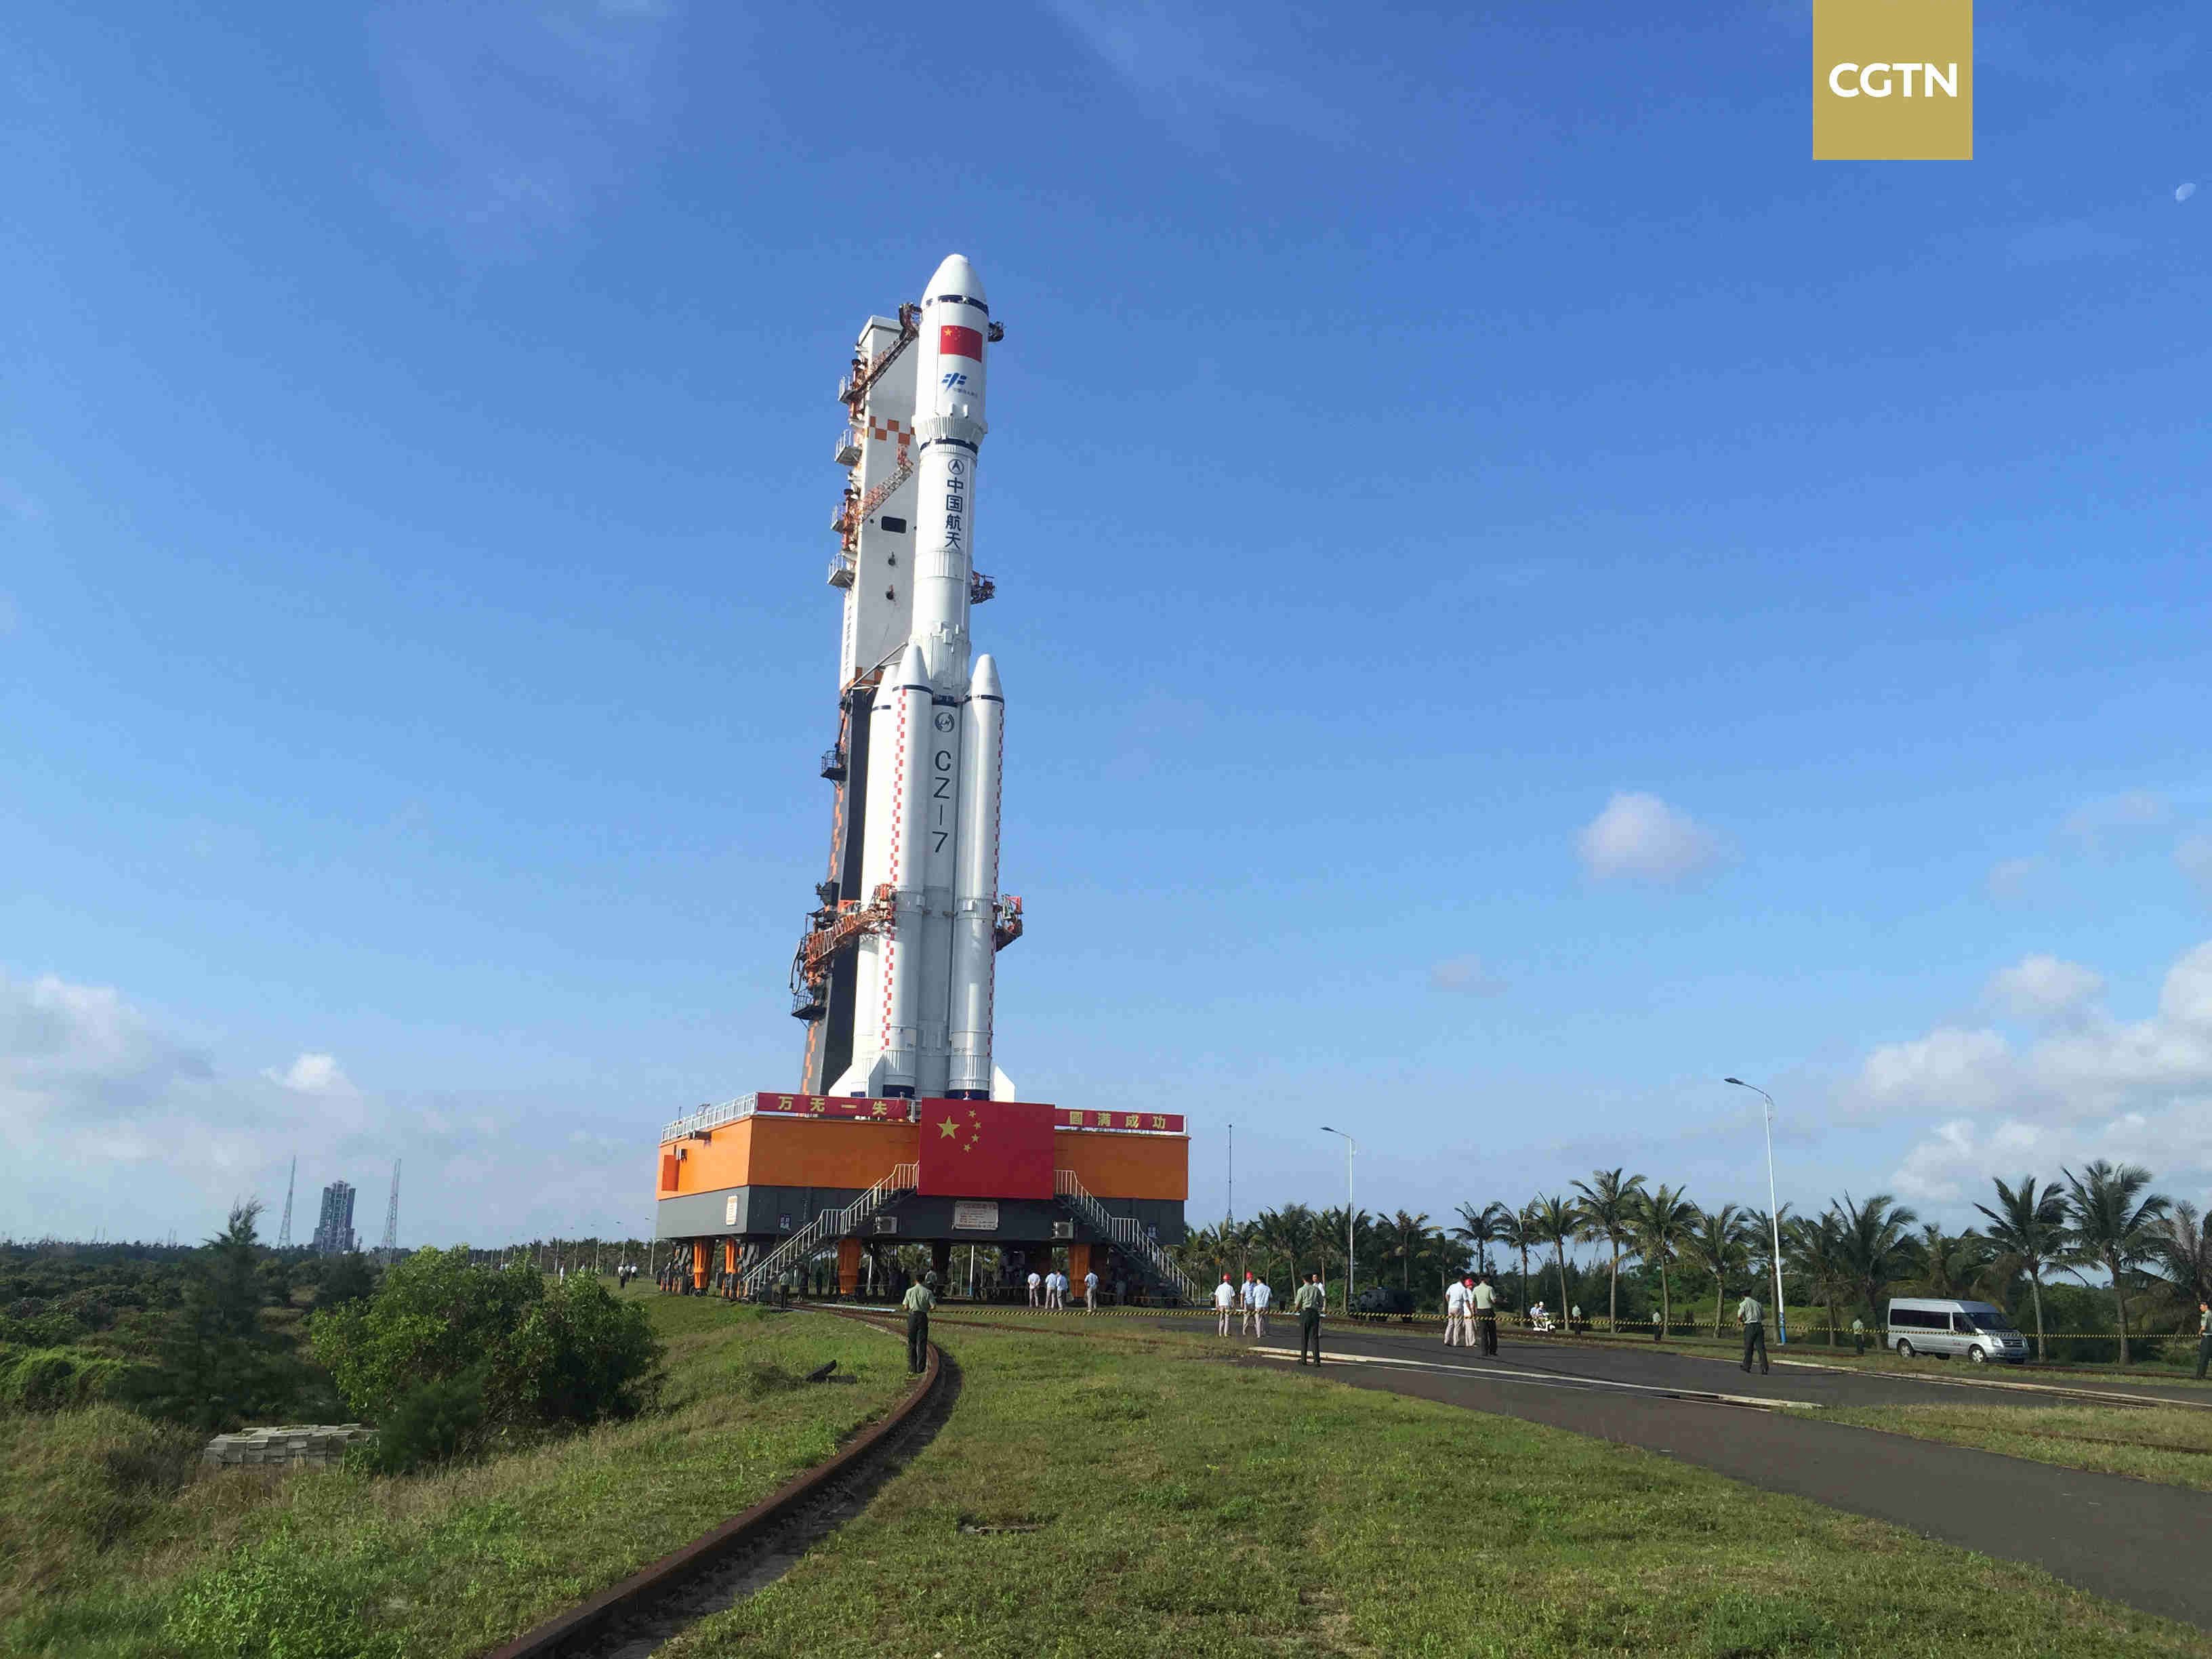 Carrier Rocket Transferred To Launch Pad For Tianzhou 1 Space Cargo